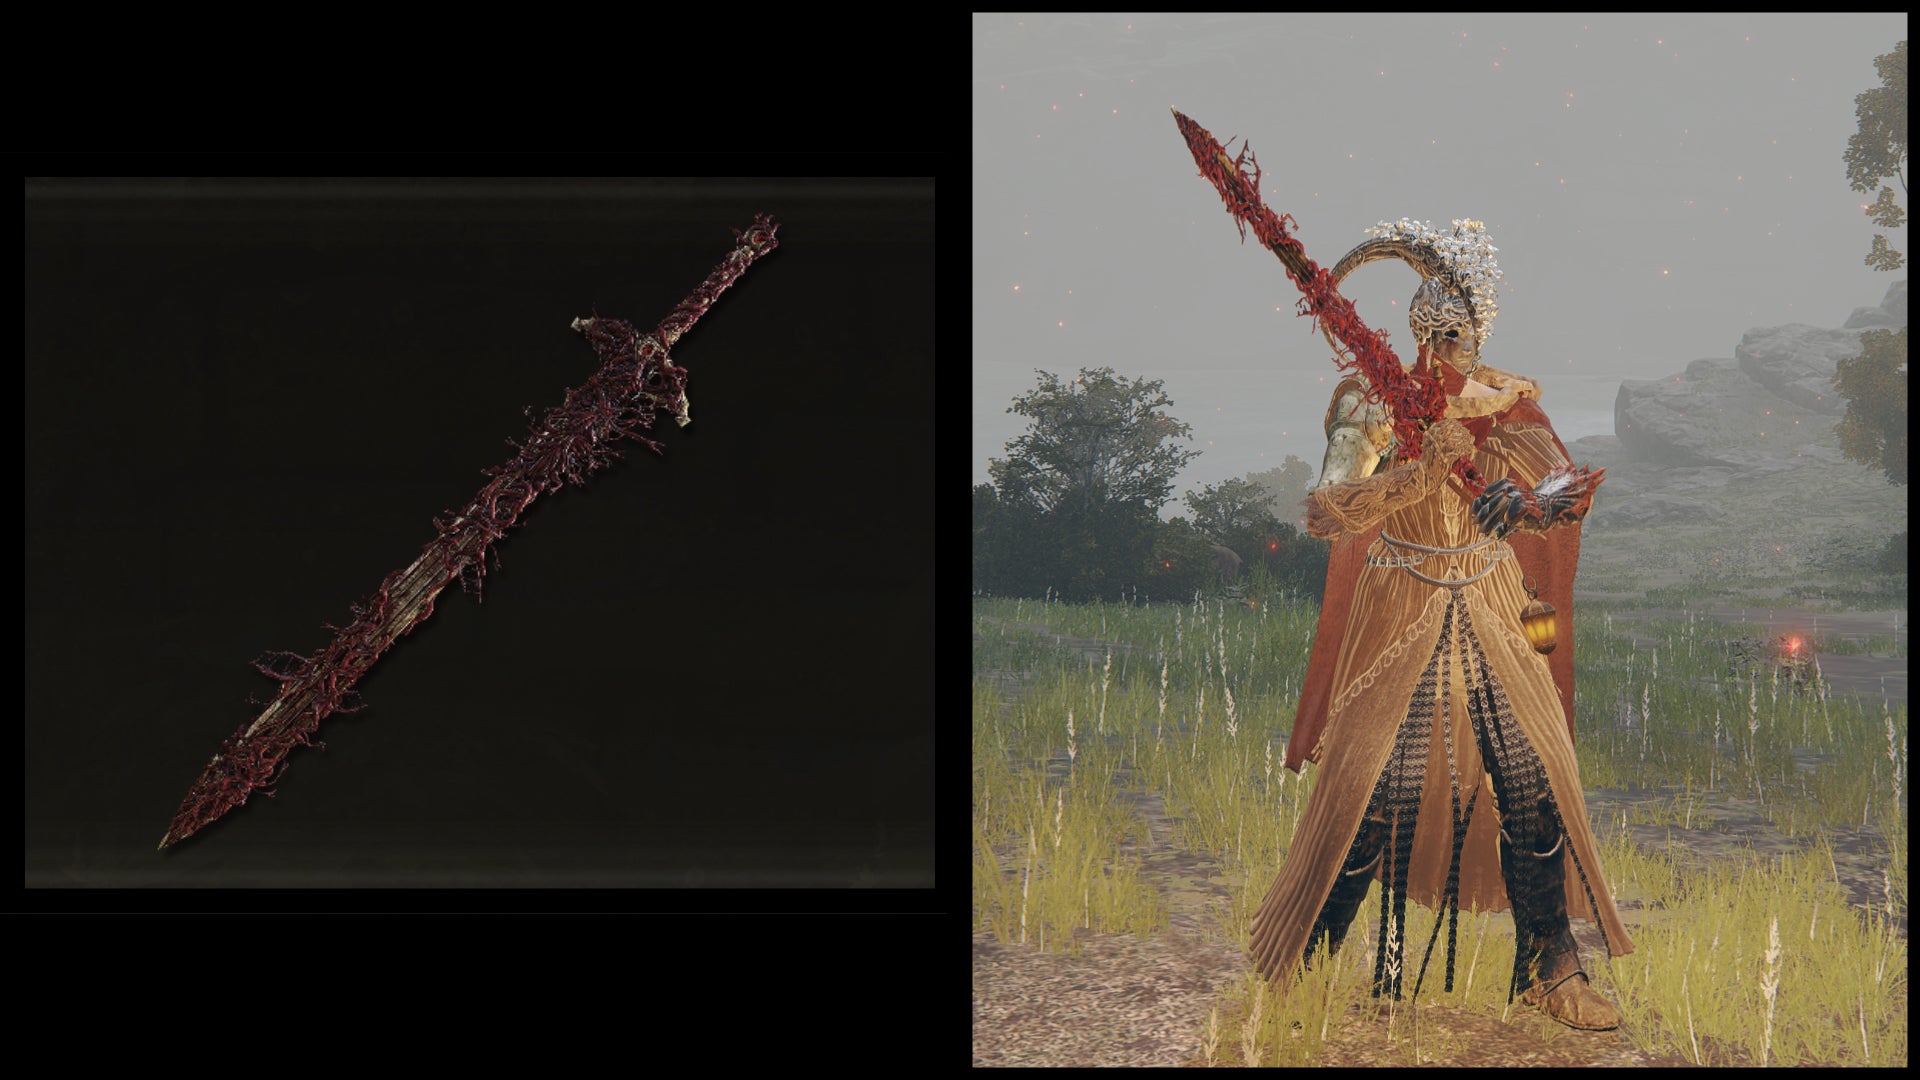 Left: an illustration of the Blasphemous Blade from Elden Ring. Right: the player character holding the same weapon against a Limgrave background.